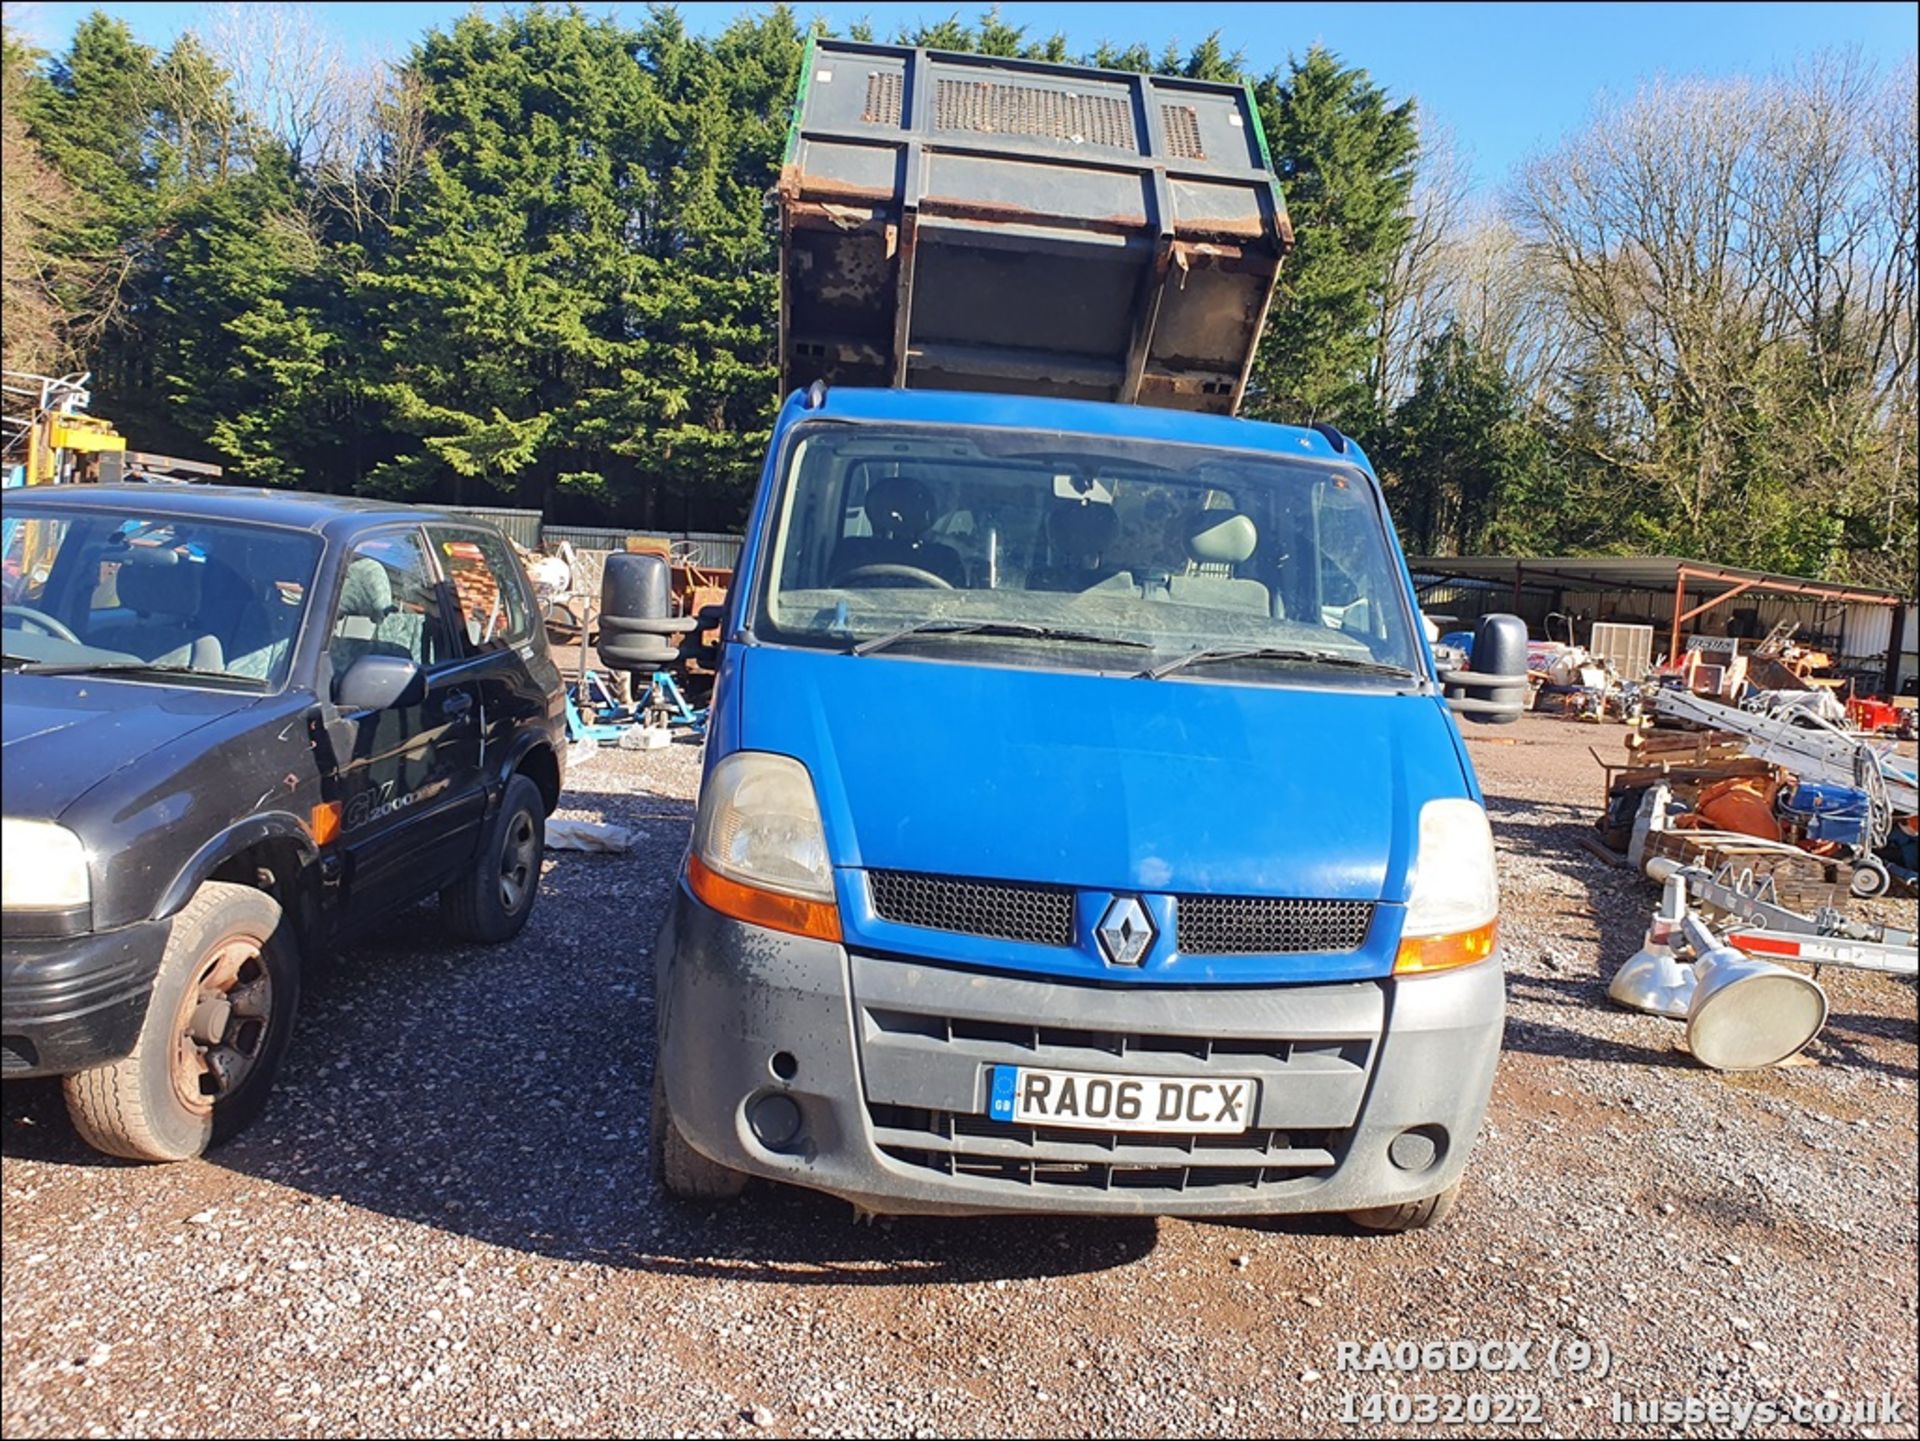 06/06 RENAULT MASTER CCML35 DCI 120 MWB - 2463cc 2dr Tipper (Grey) - Image 9 of 22